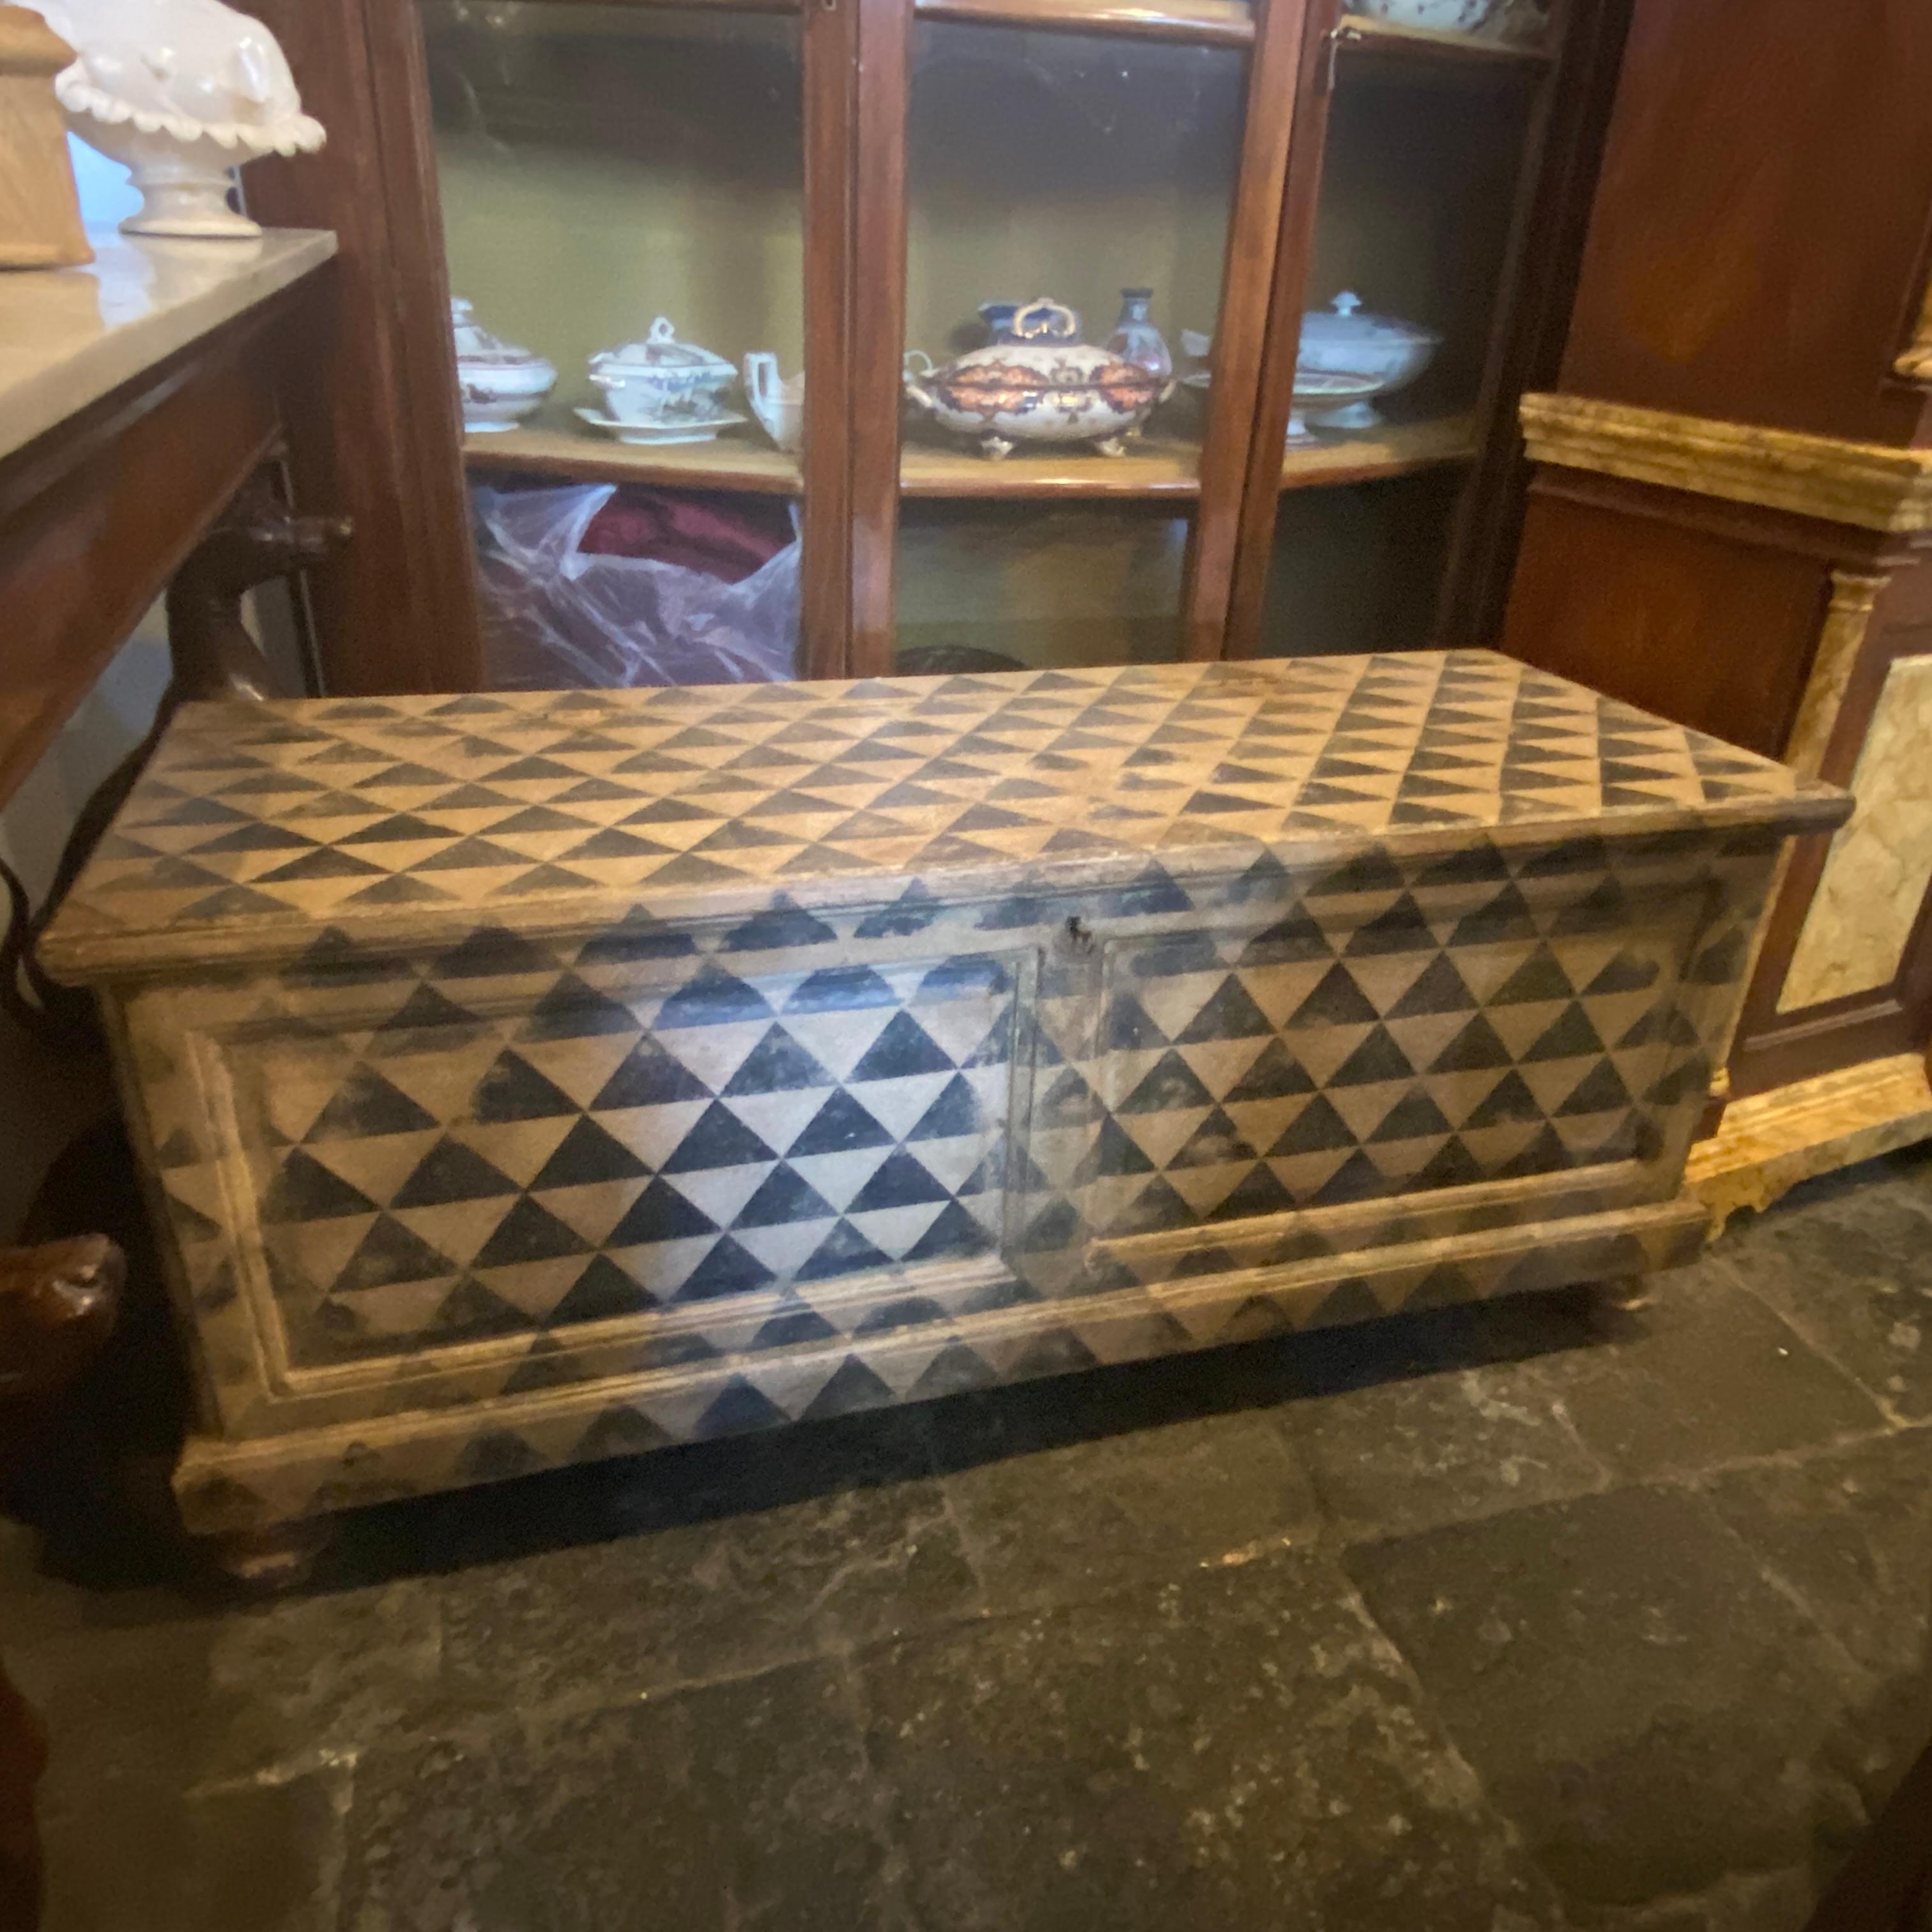 A Tuscanian blanket chest manufactured in Italy in the late 19th century, it's in original conditions and it has normal signs of use and age. The inside part it's blue painted, the white and black decor depicts triangles and it's suitable for modern